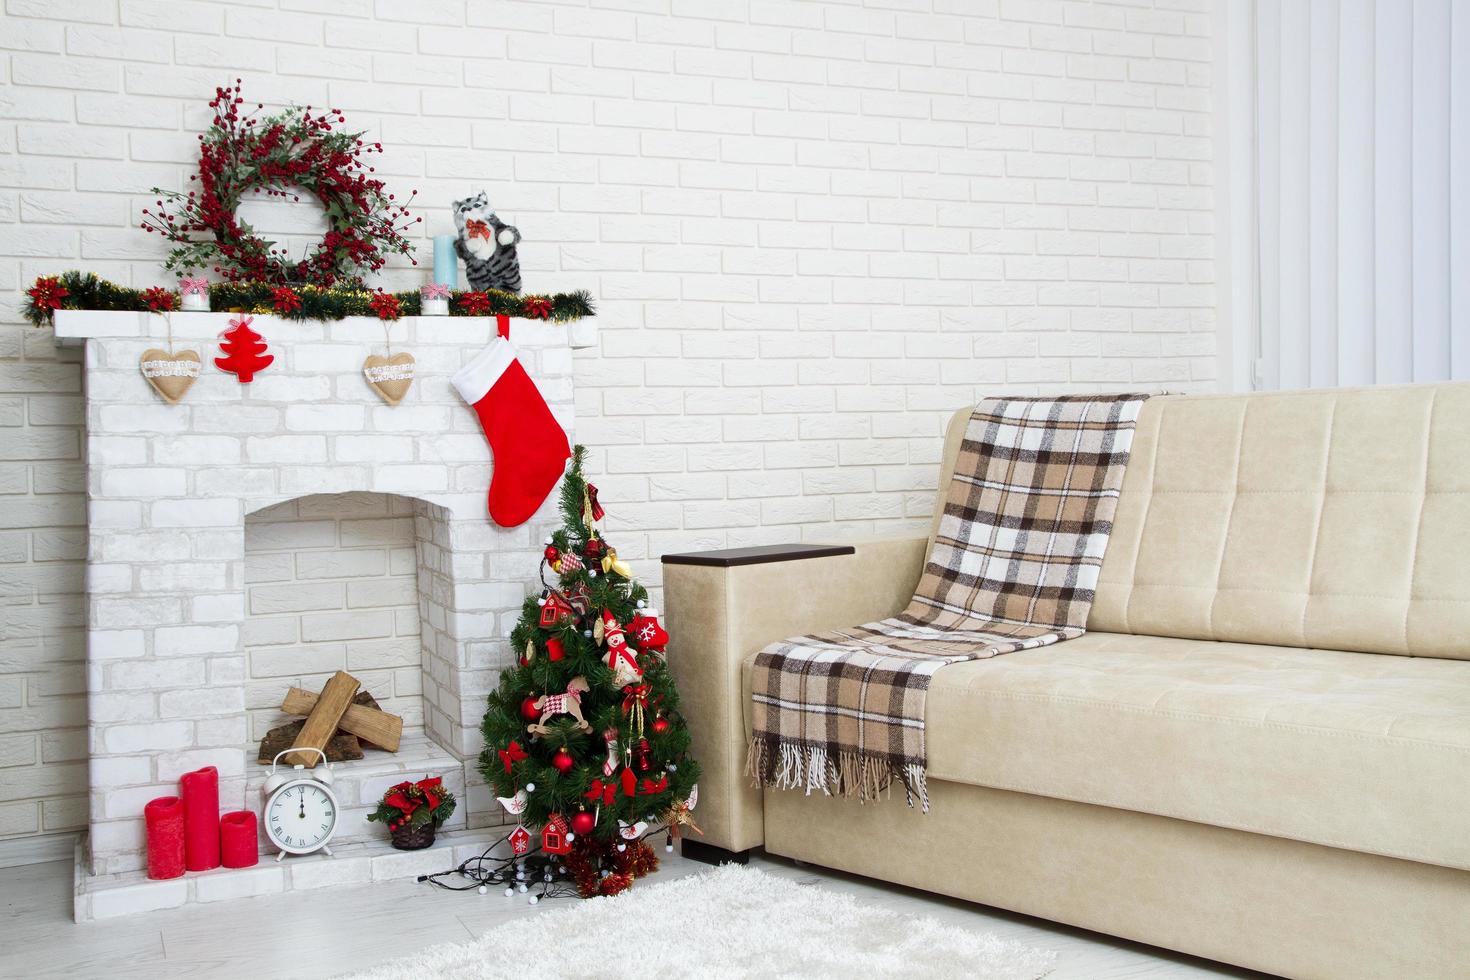 Christmas living room with a christmas tree and fire place presents under it - modern classic style, new year concept photo